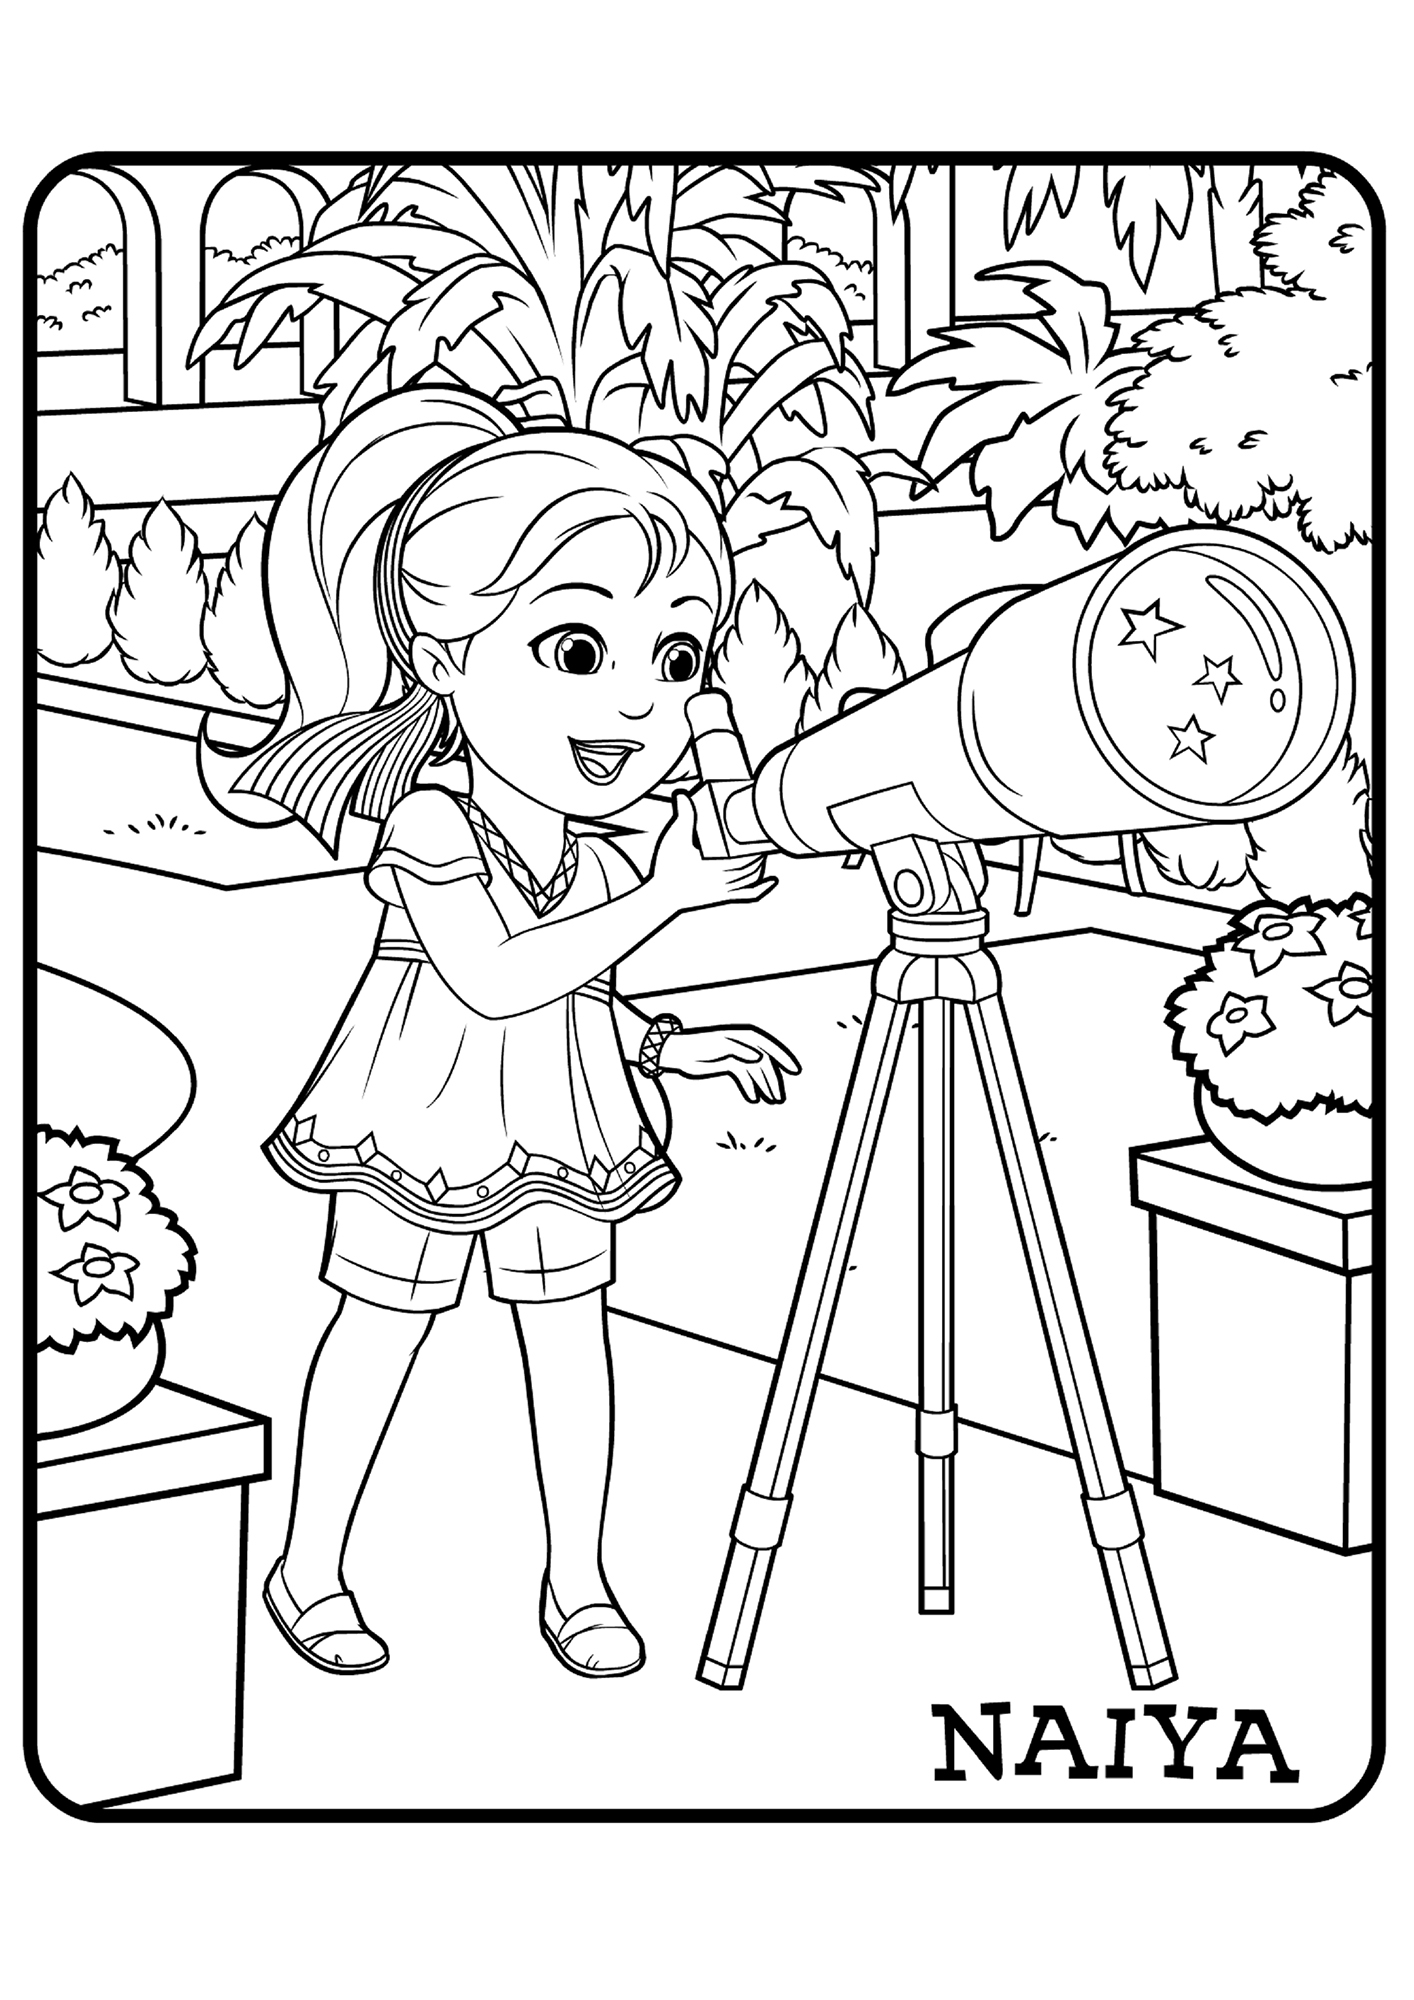 Dora and friends coloring pages to download and print for free